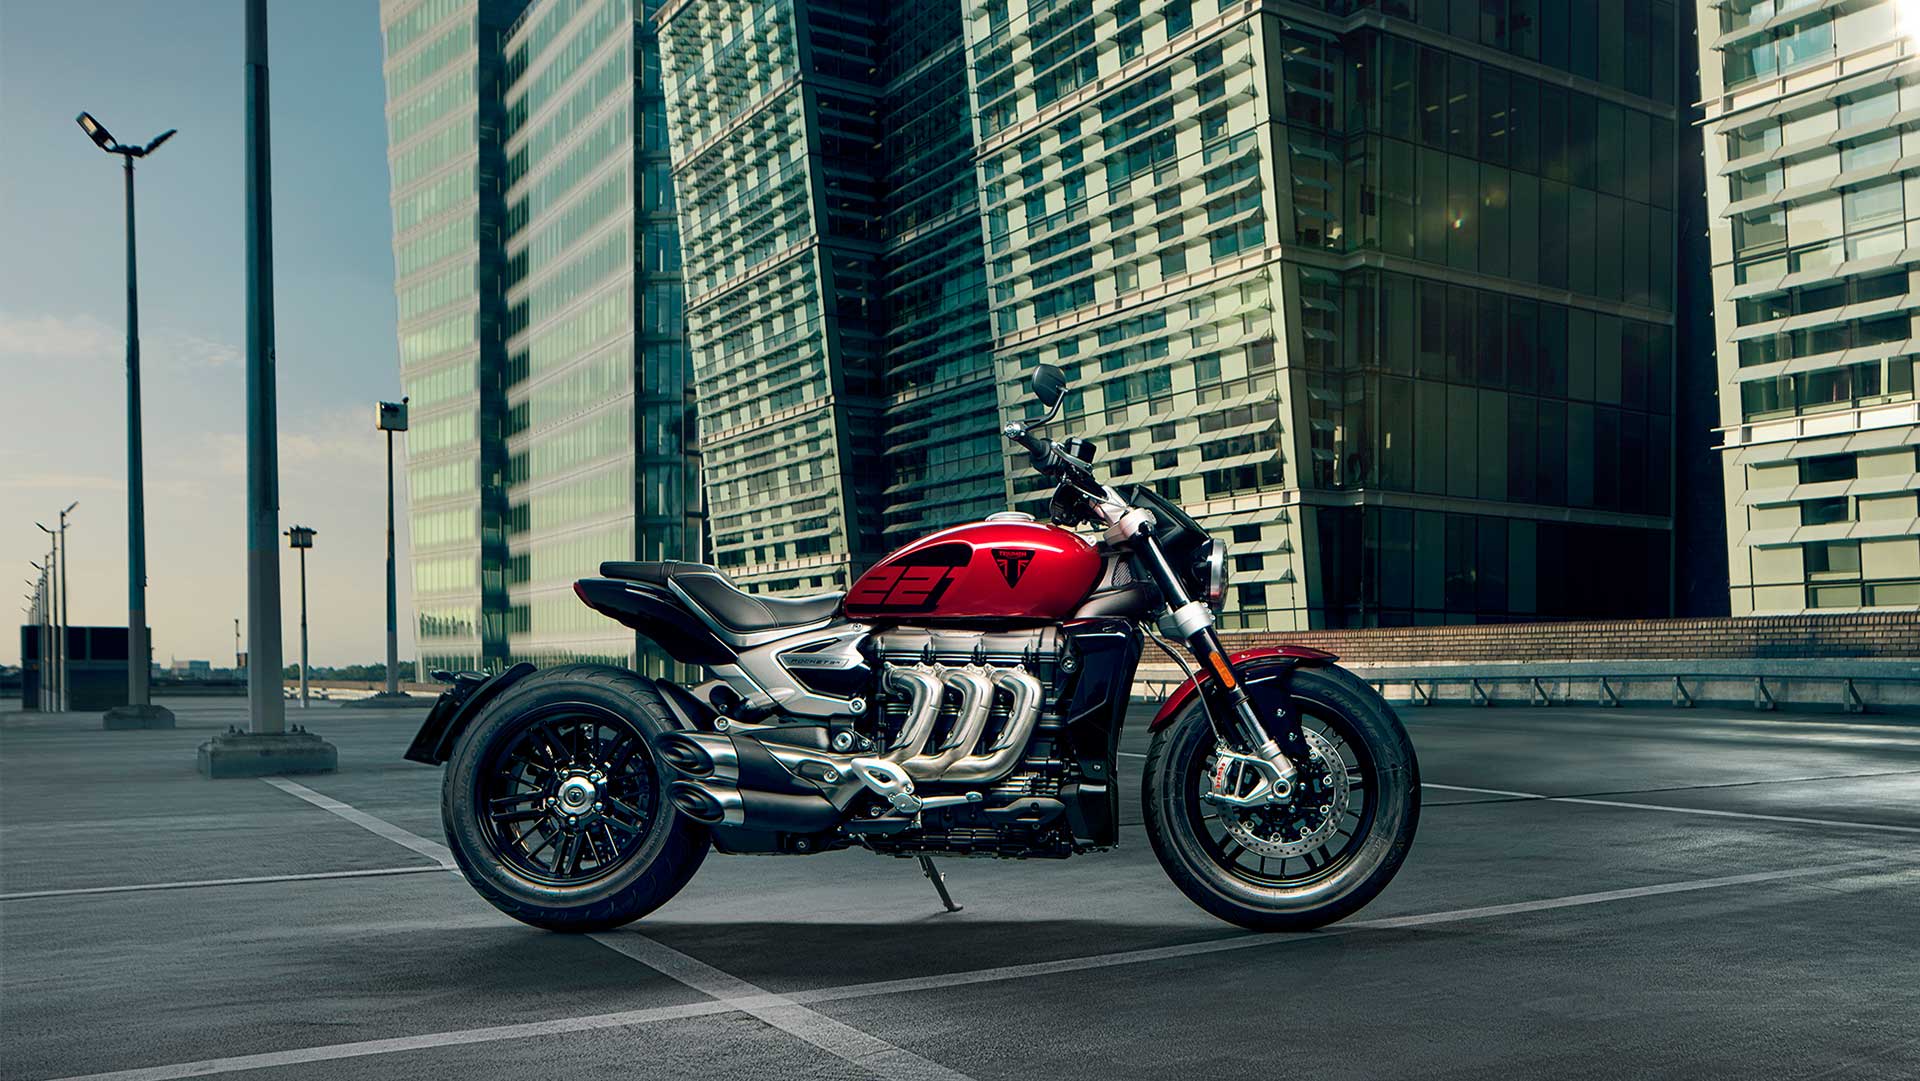 2022 Triumph Rocket 3 R 221 Special Edition in Albany, New York - Photo 3